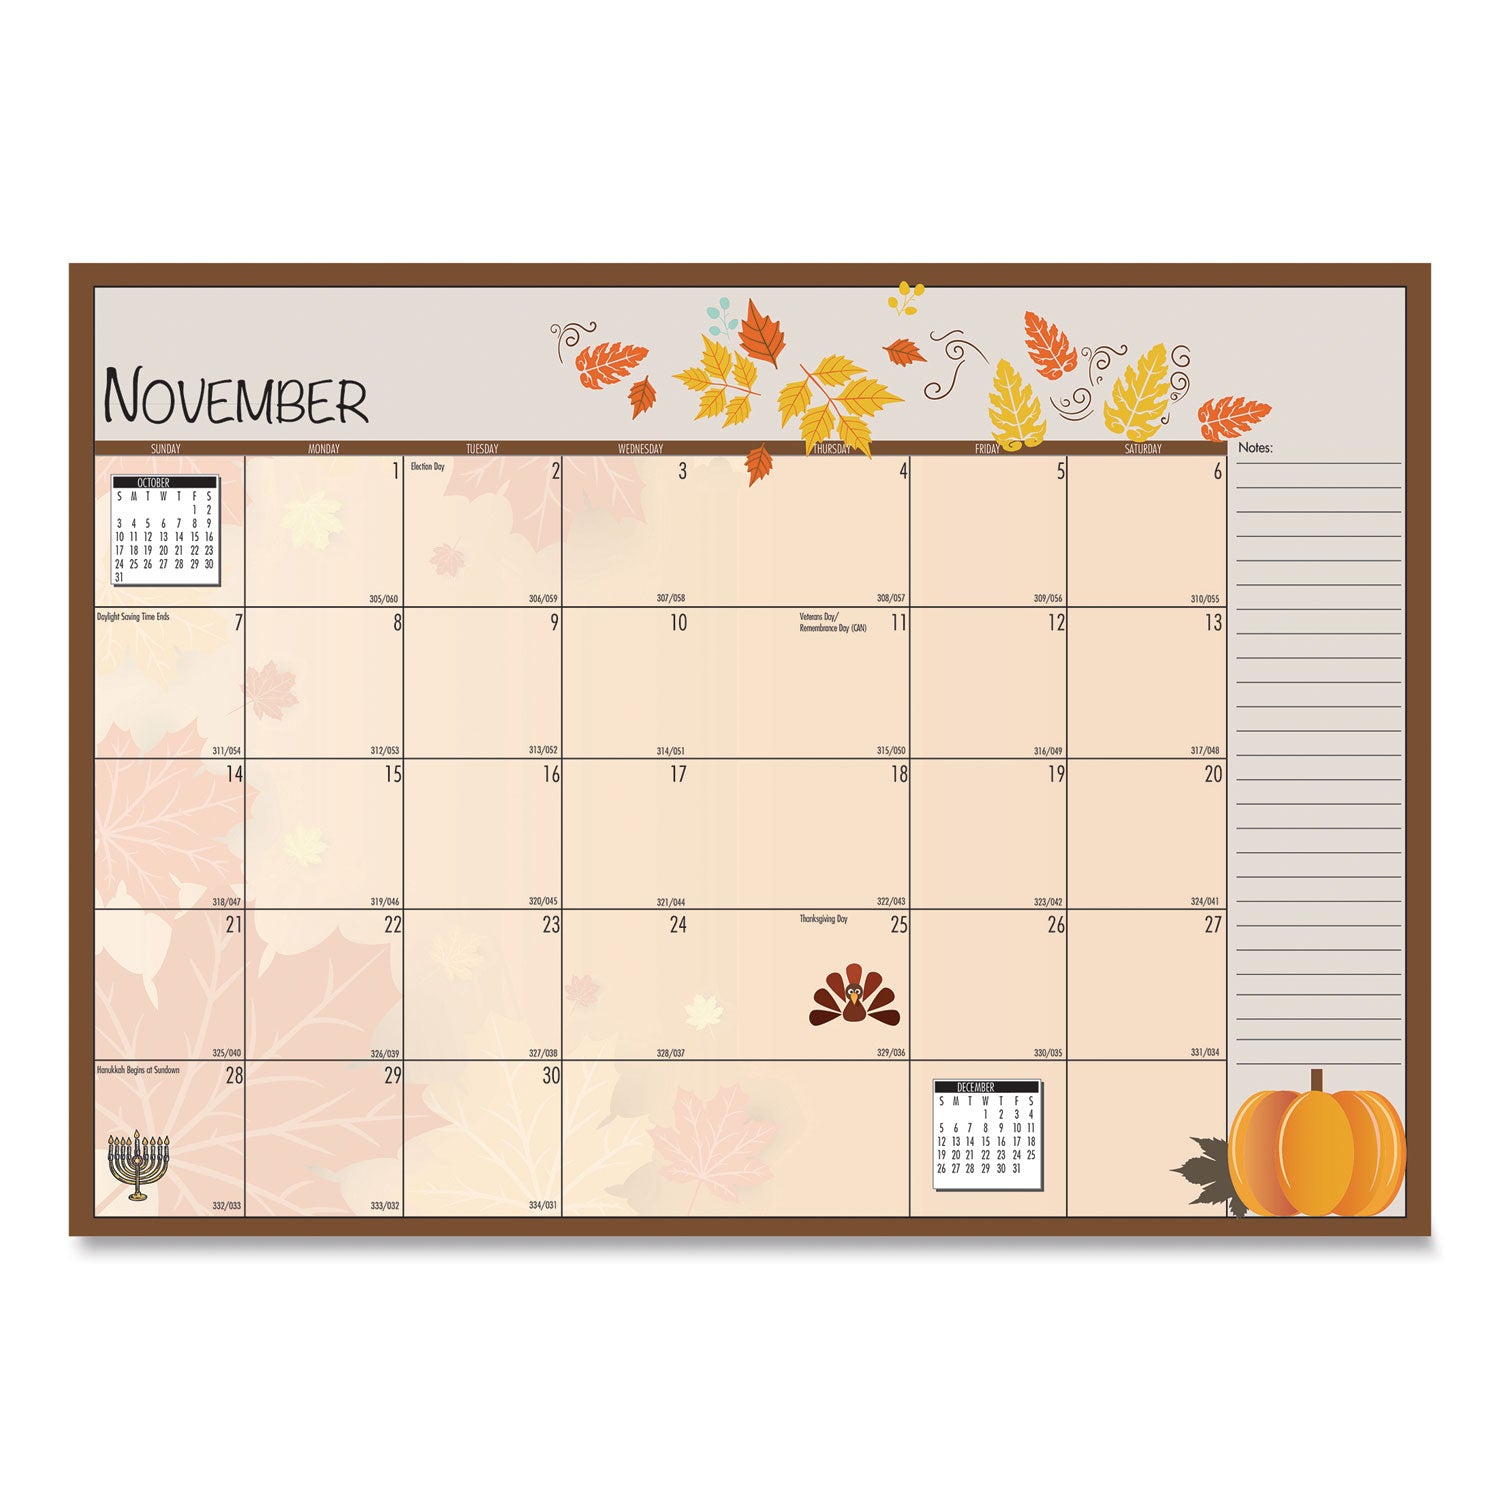 seasonal-monthly-planner-seasonal-artwork-10-x-7-light-blue-cover-12-month-july-to-june-2022-to-2023_hod239508 - 6